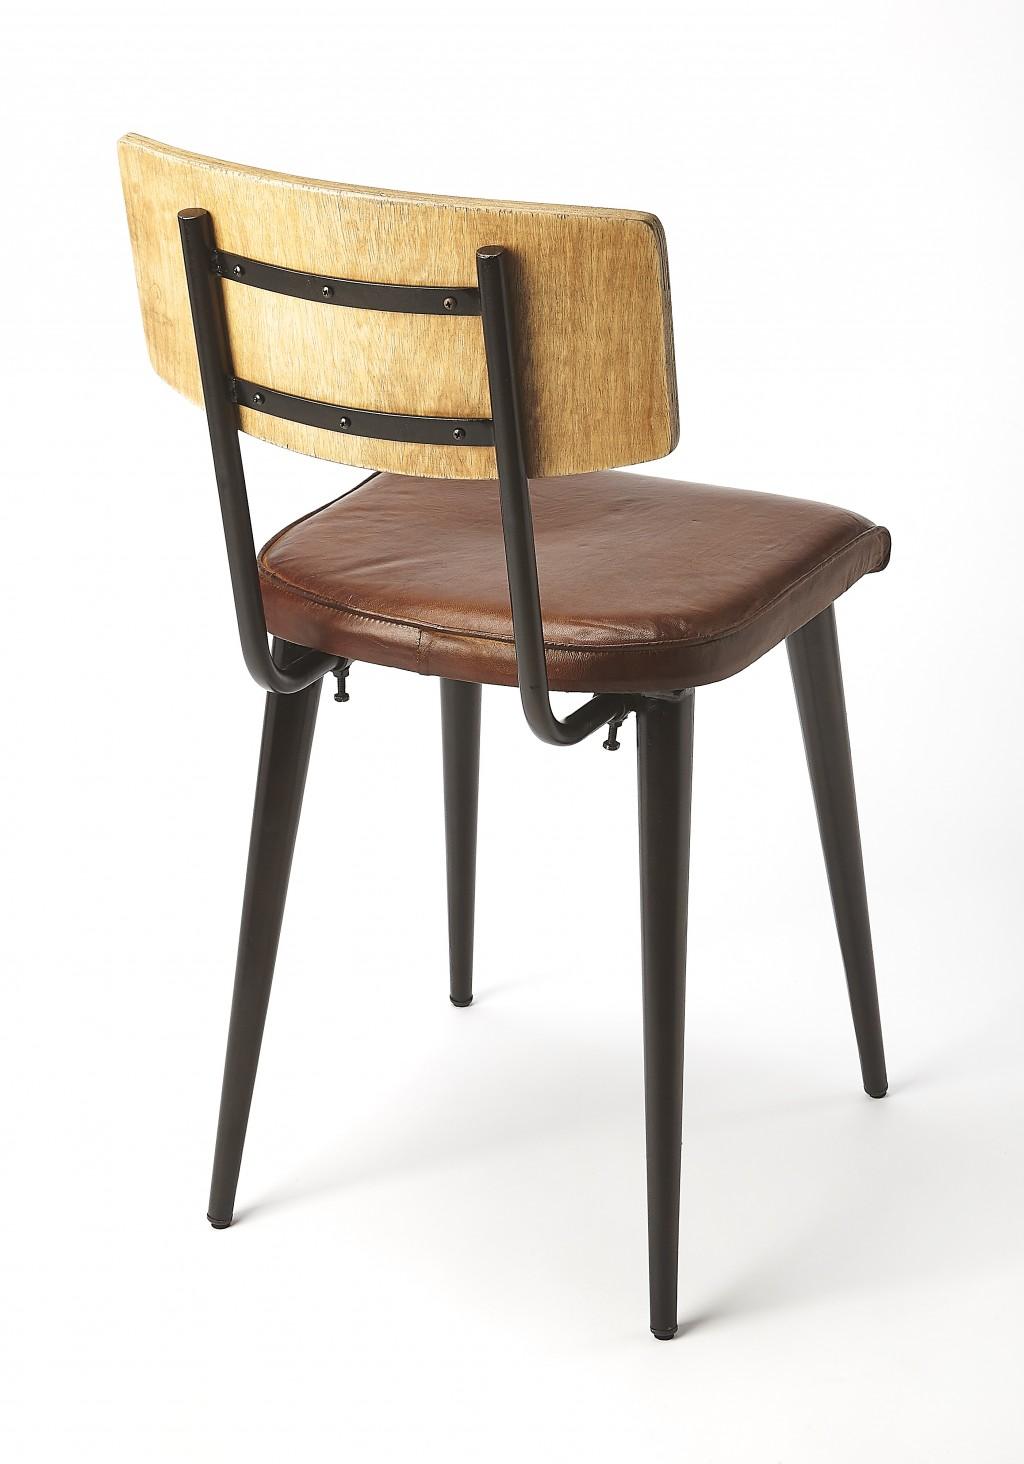 Metal and Wood Leather Dining Chair